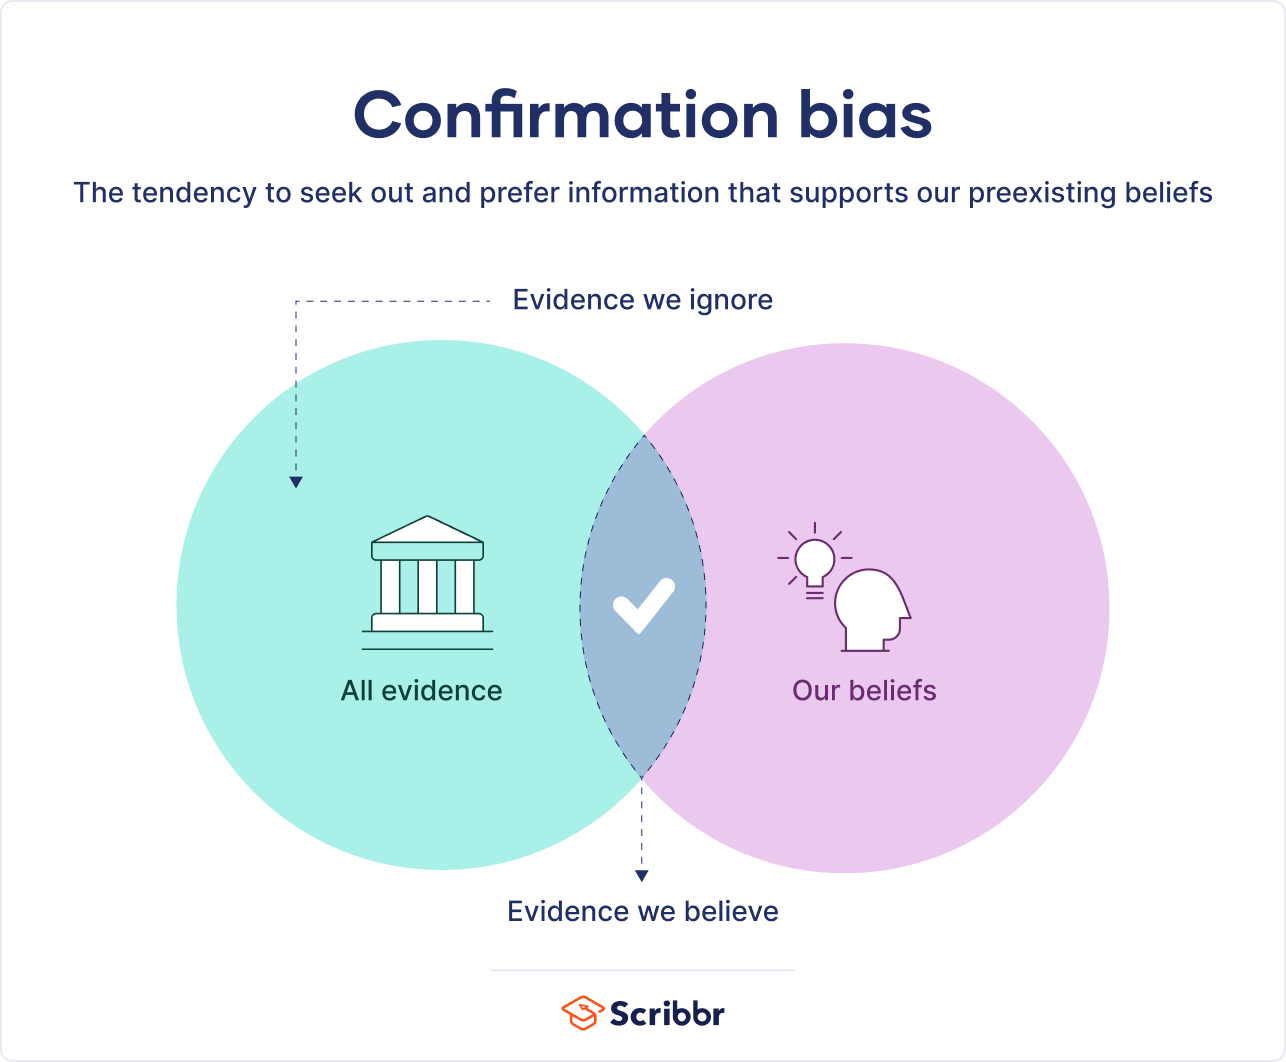 What Is Confirmation Bias? | Definition & Examples